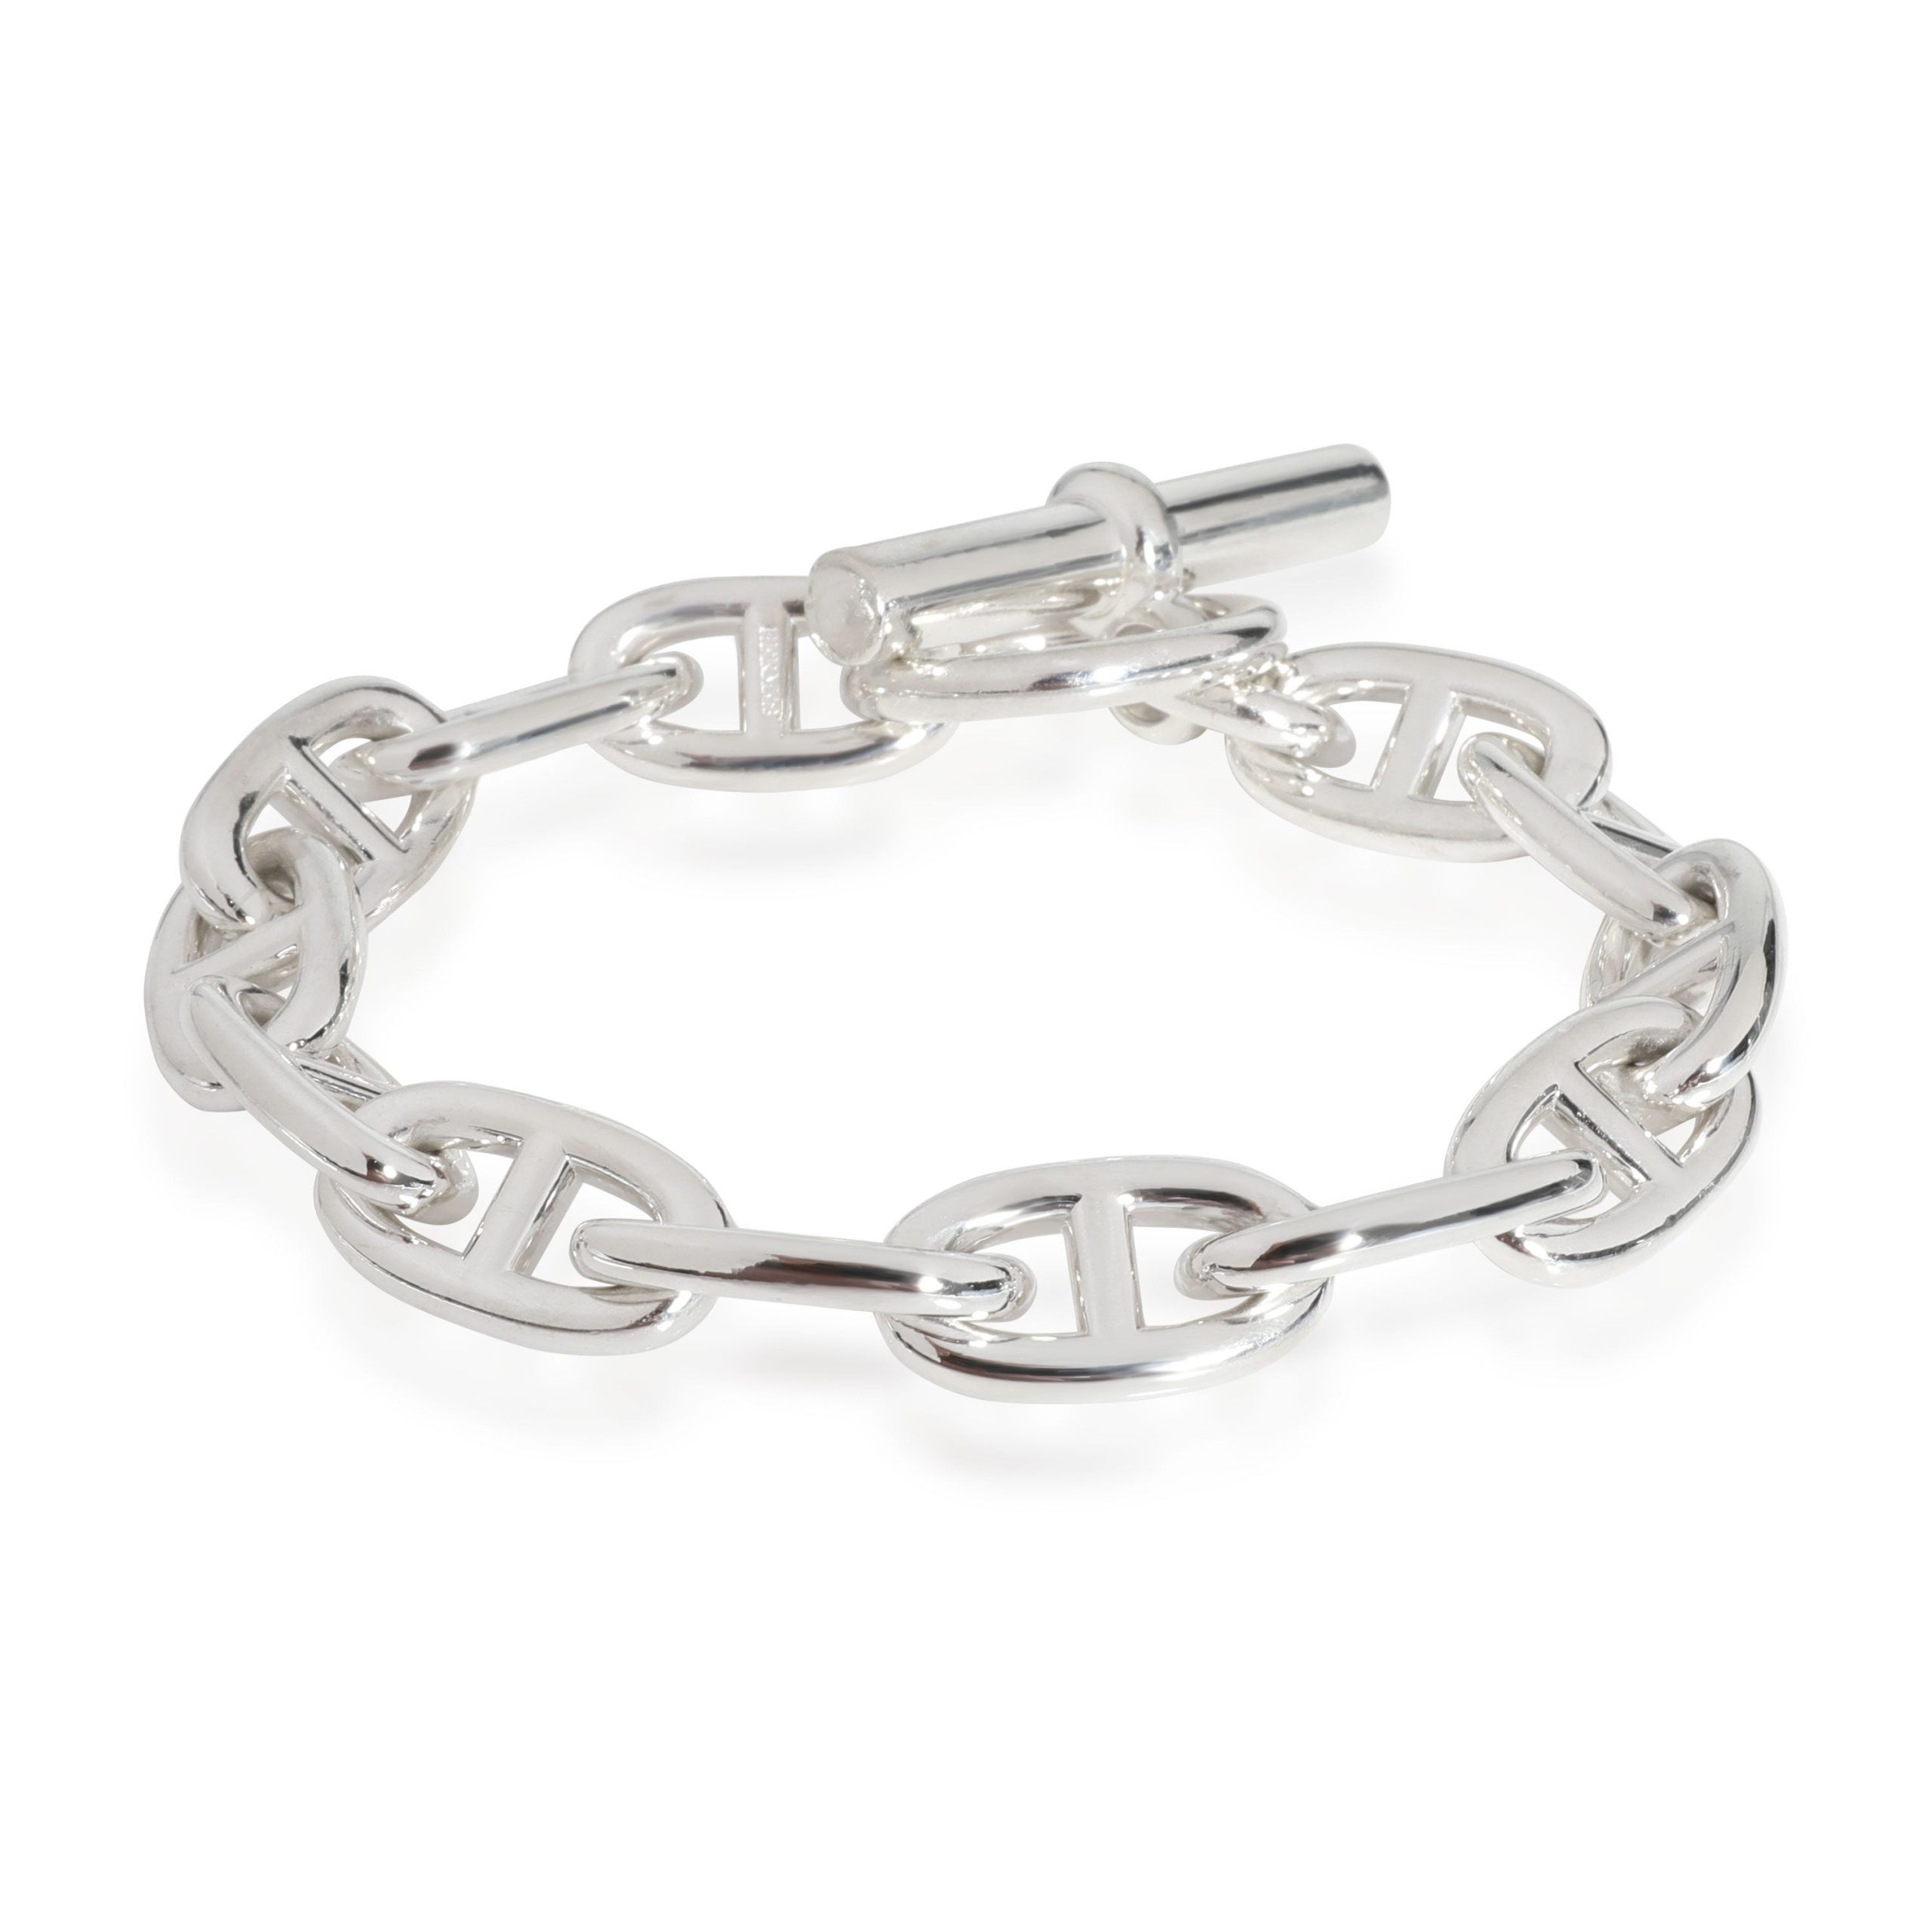 image of Hermes Chaine D'ancre Bracelet, Small Model, In Sterling Silver, Women's